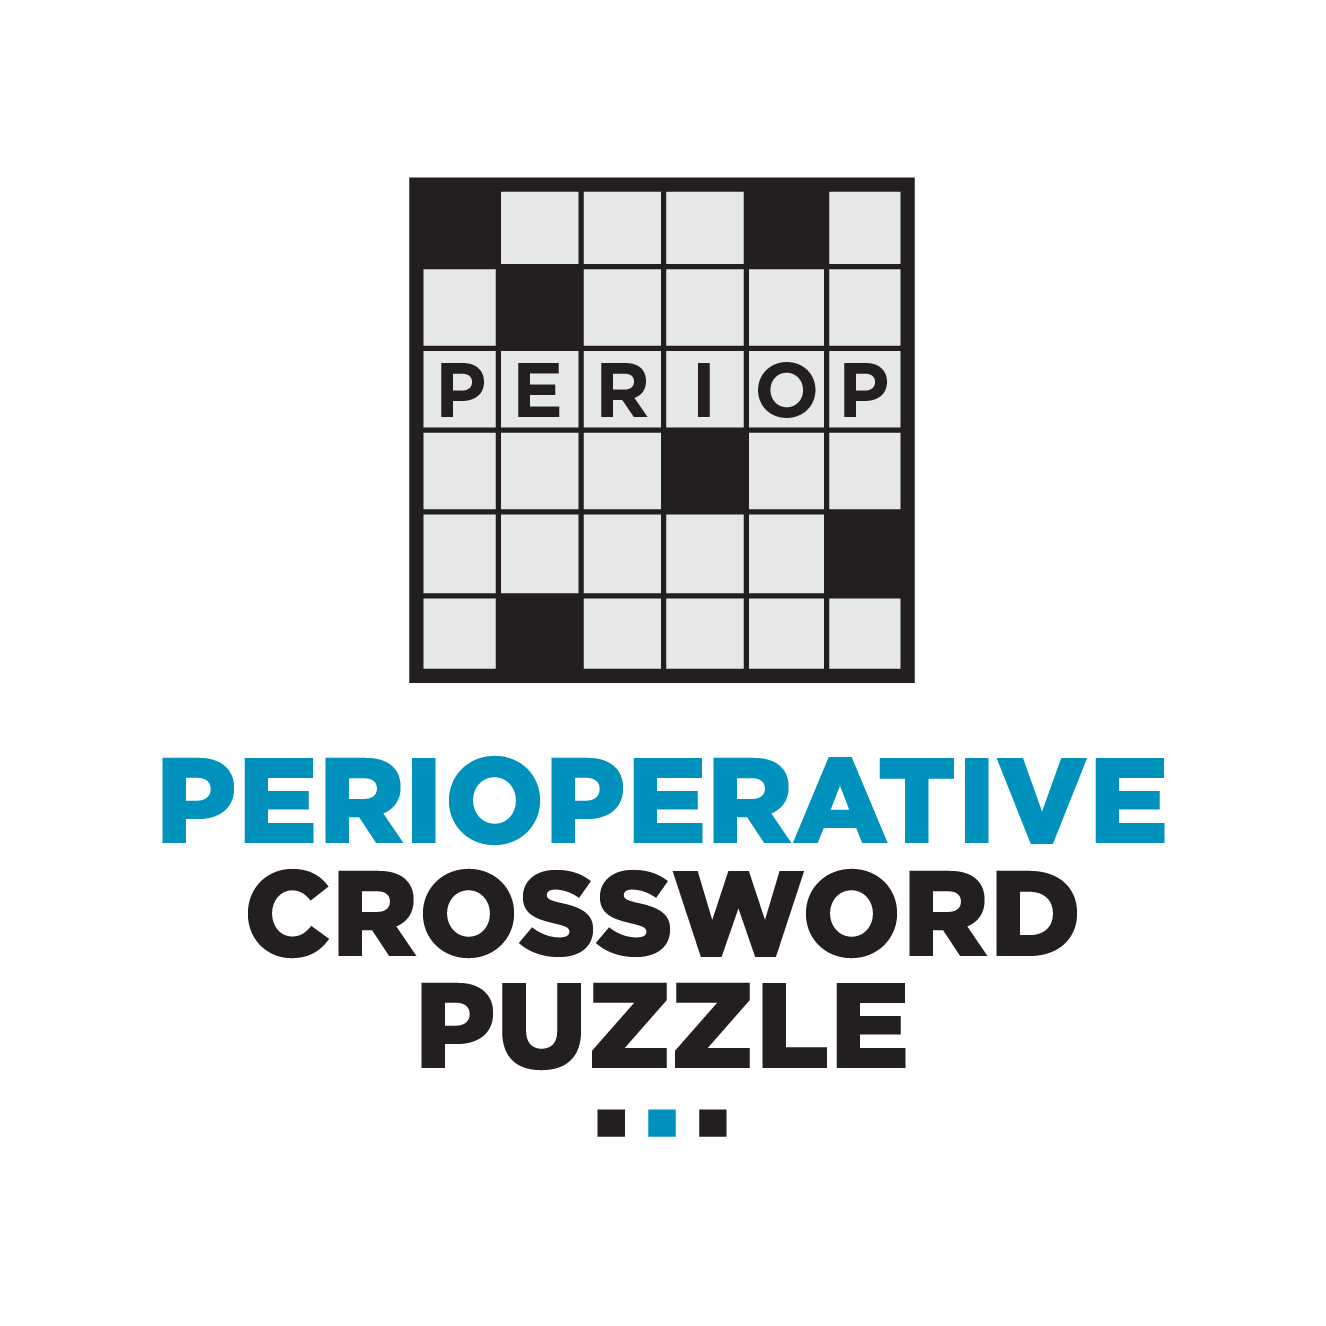 Crossword Puzzle: Transition from the Operating Room to the PACU